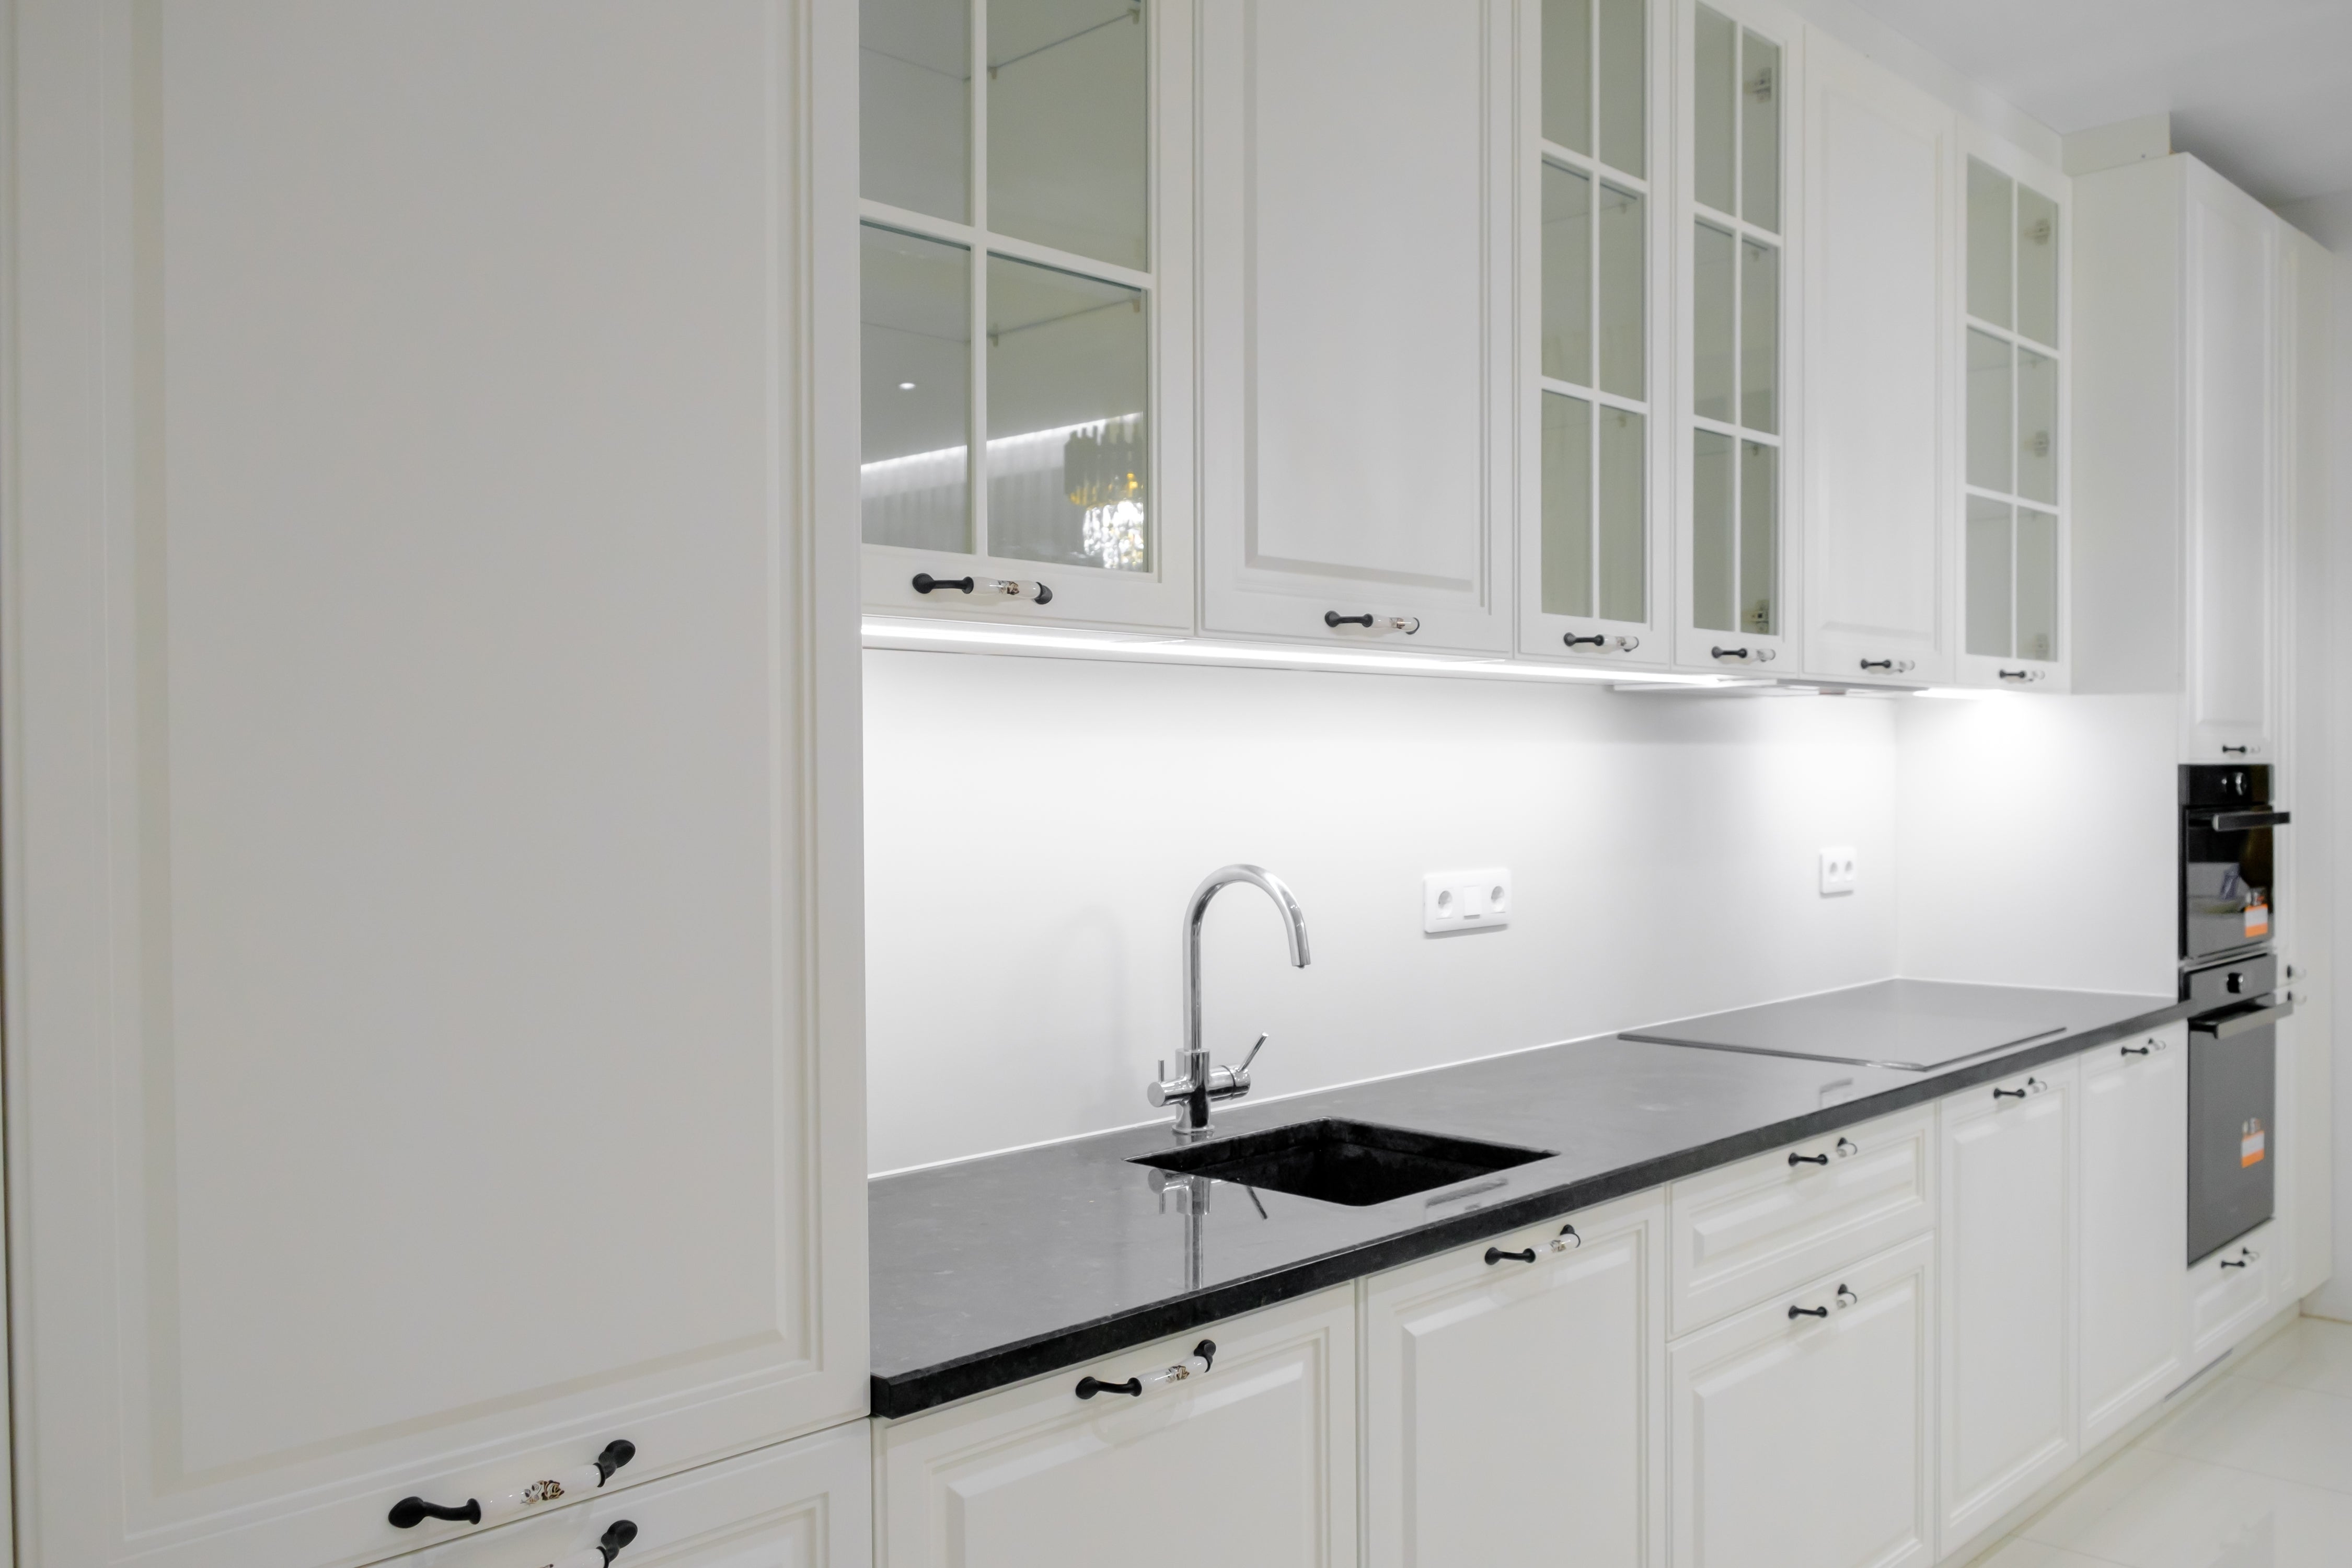 Kitchen LED Lighting: 5 Things You Didn't Know